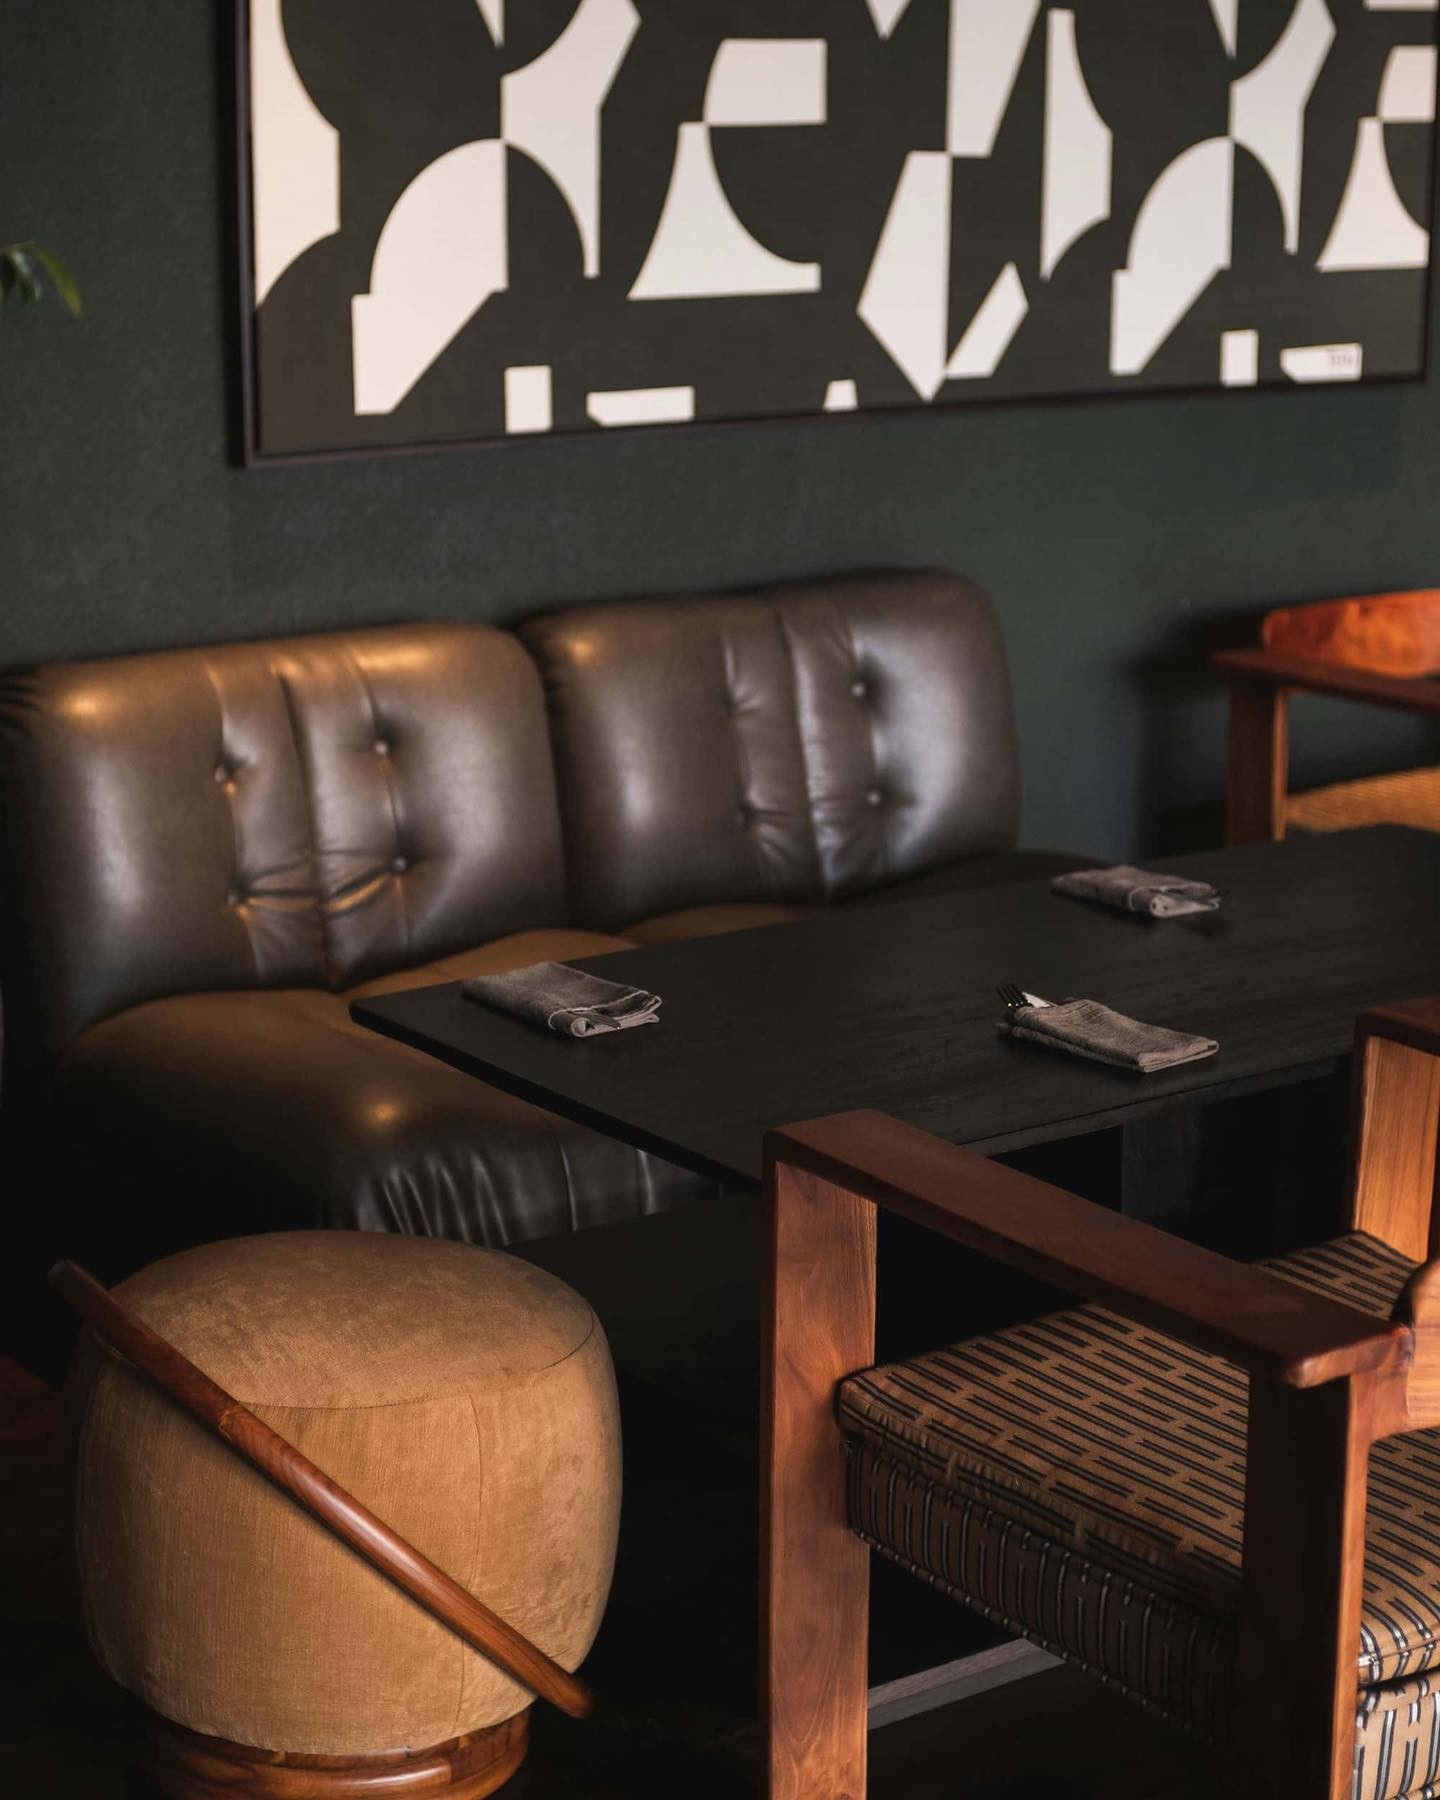 Interior of a cafe with dark leather seating, abstract wall art, and wooden furniture.